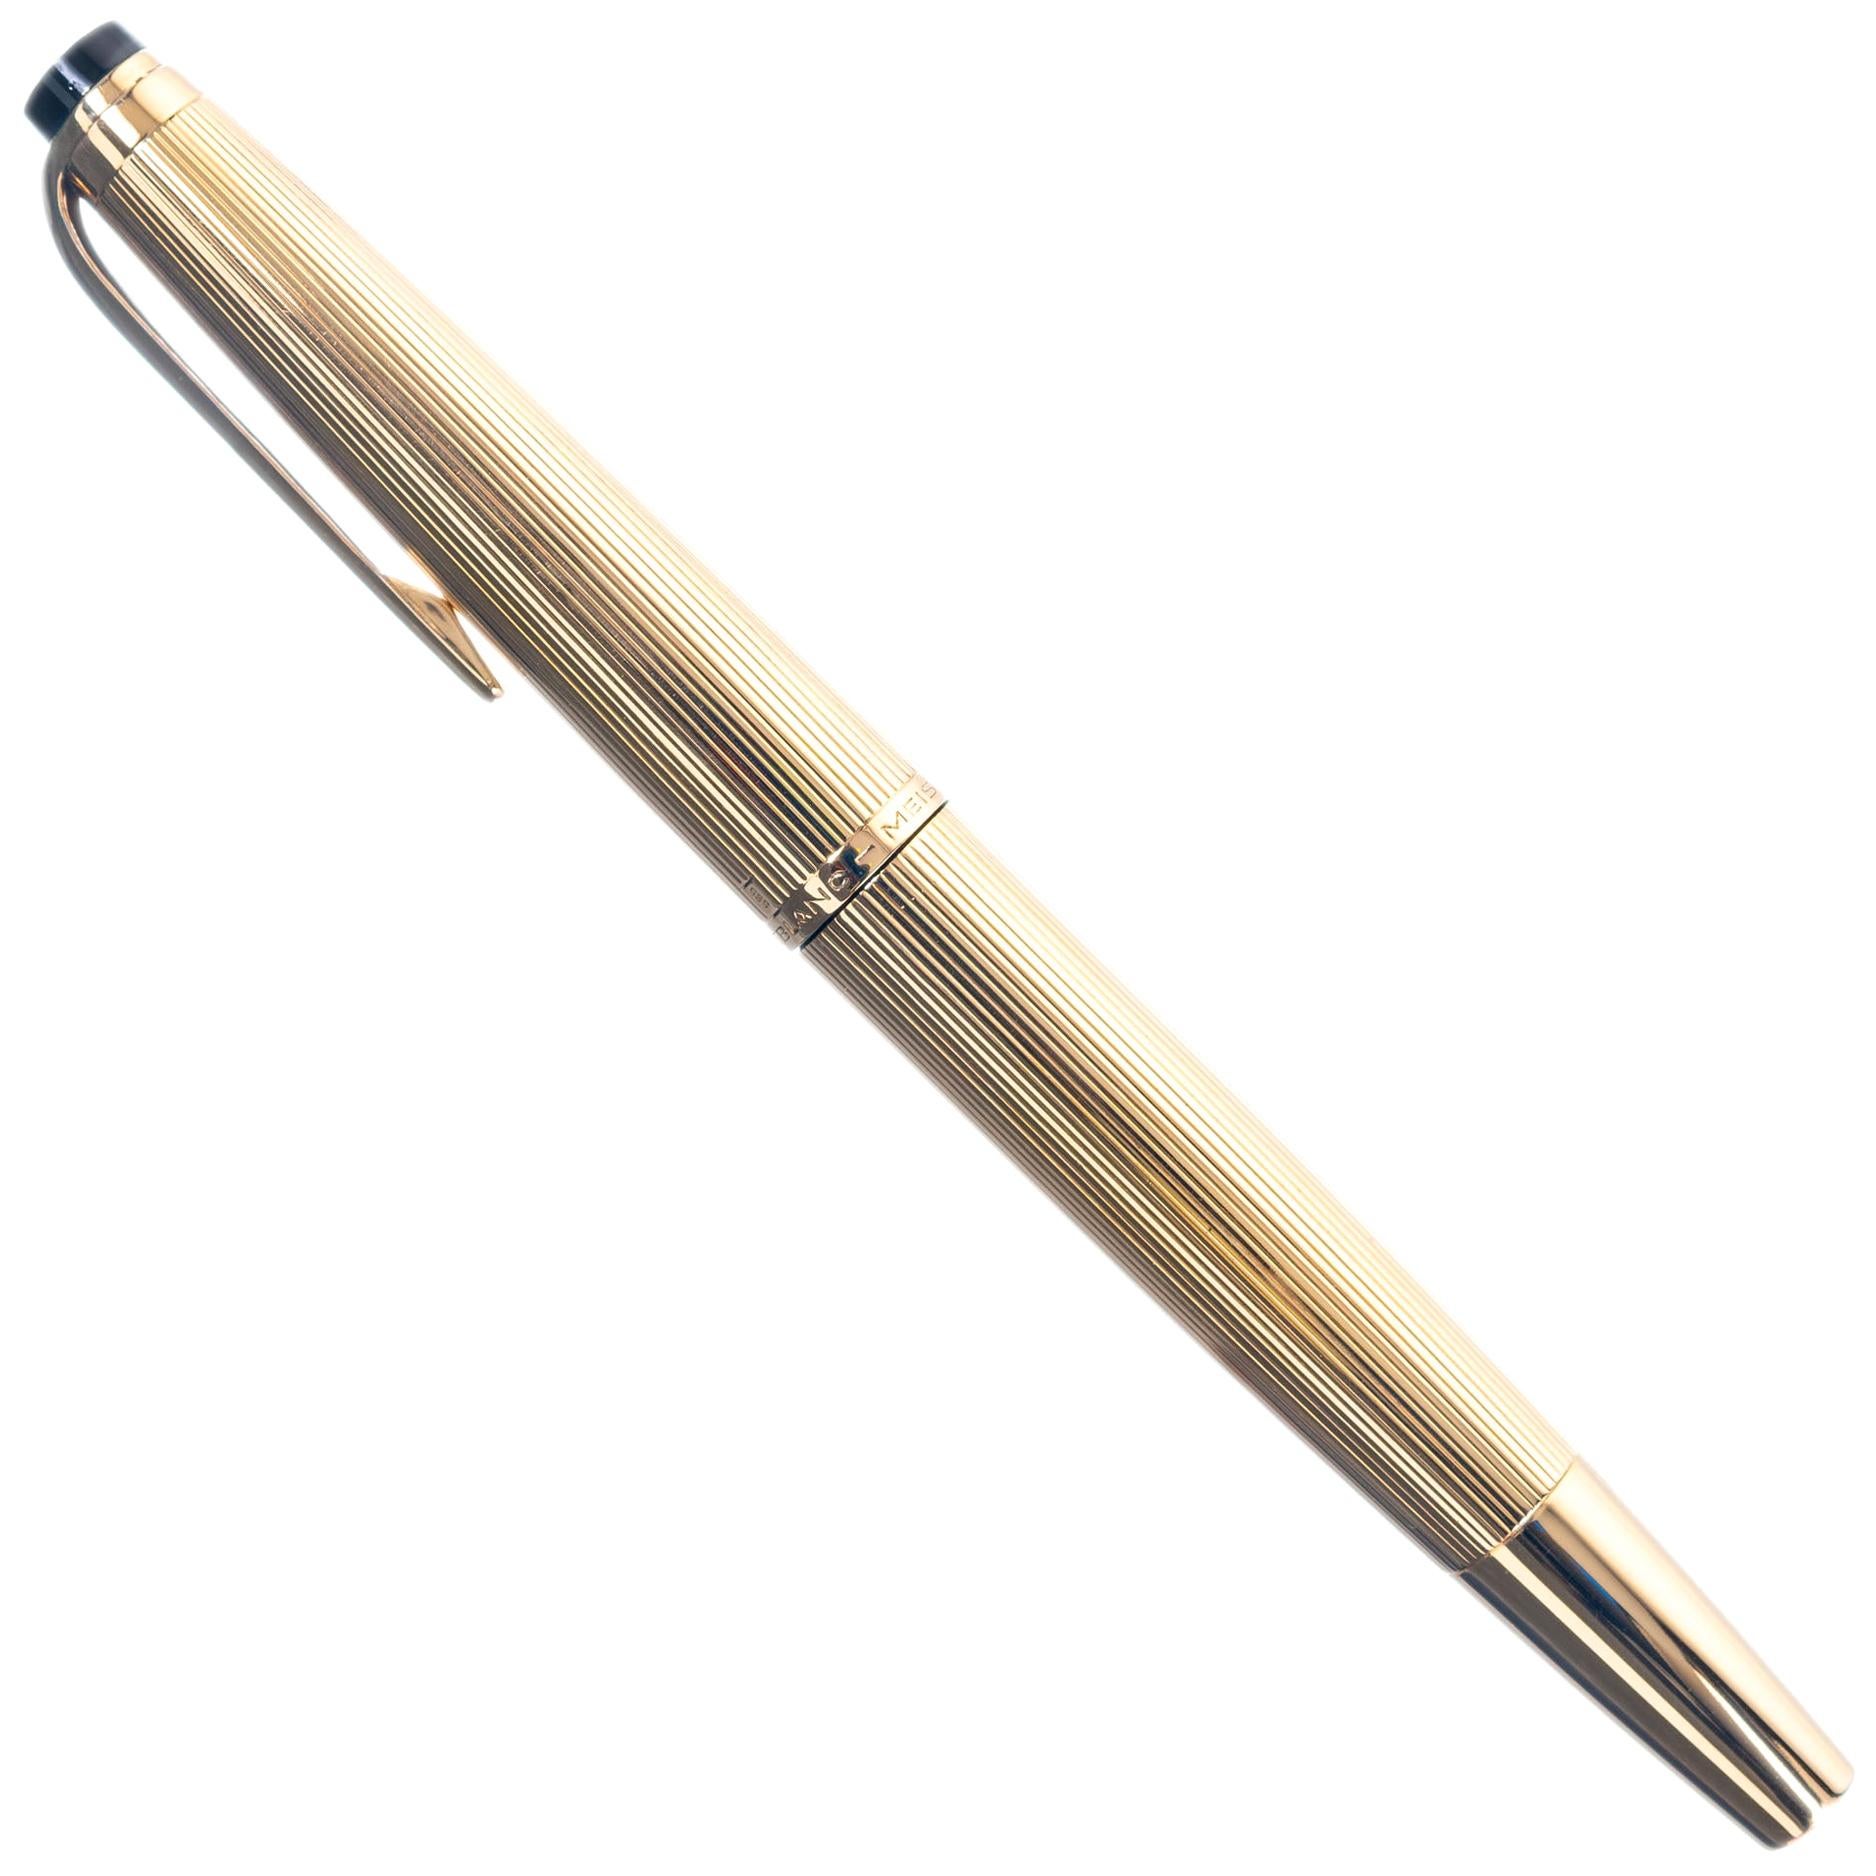 Germany Montblanc 1980's MONTBLANC heavy 23K Gold finish Rollerball Pen in all Metal 